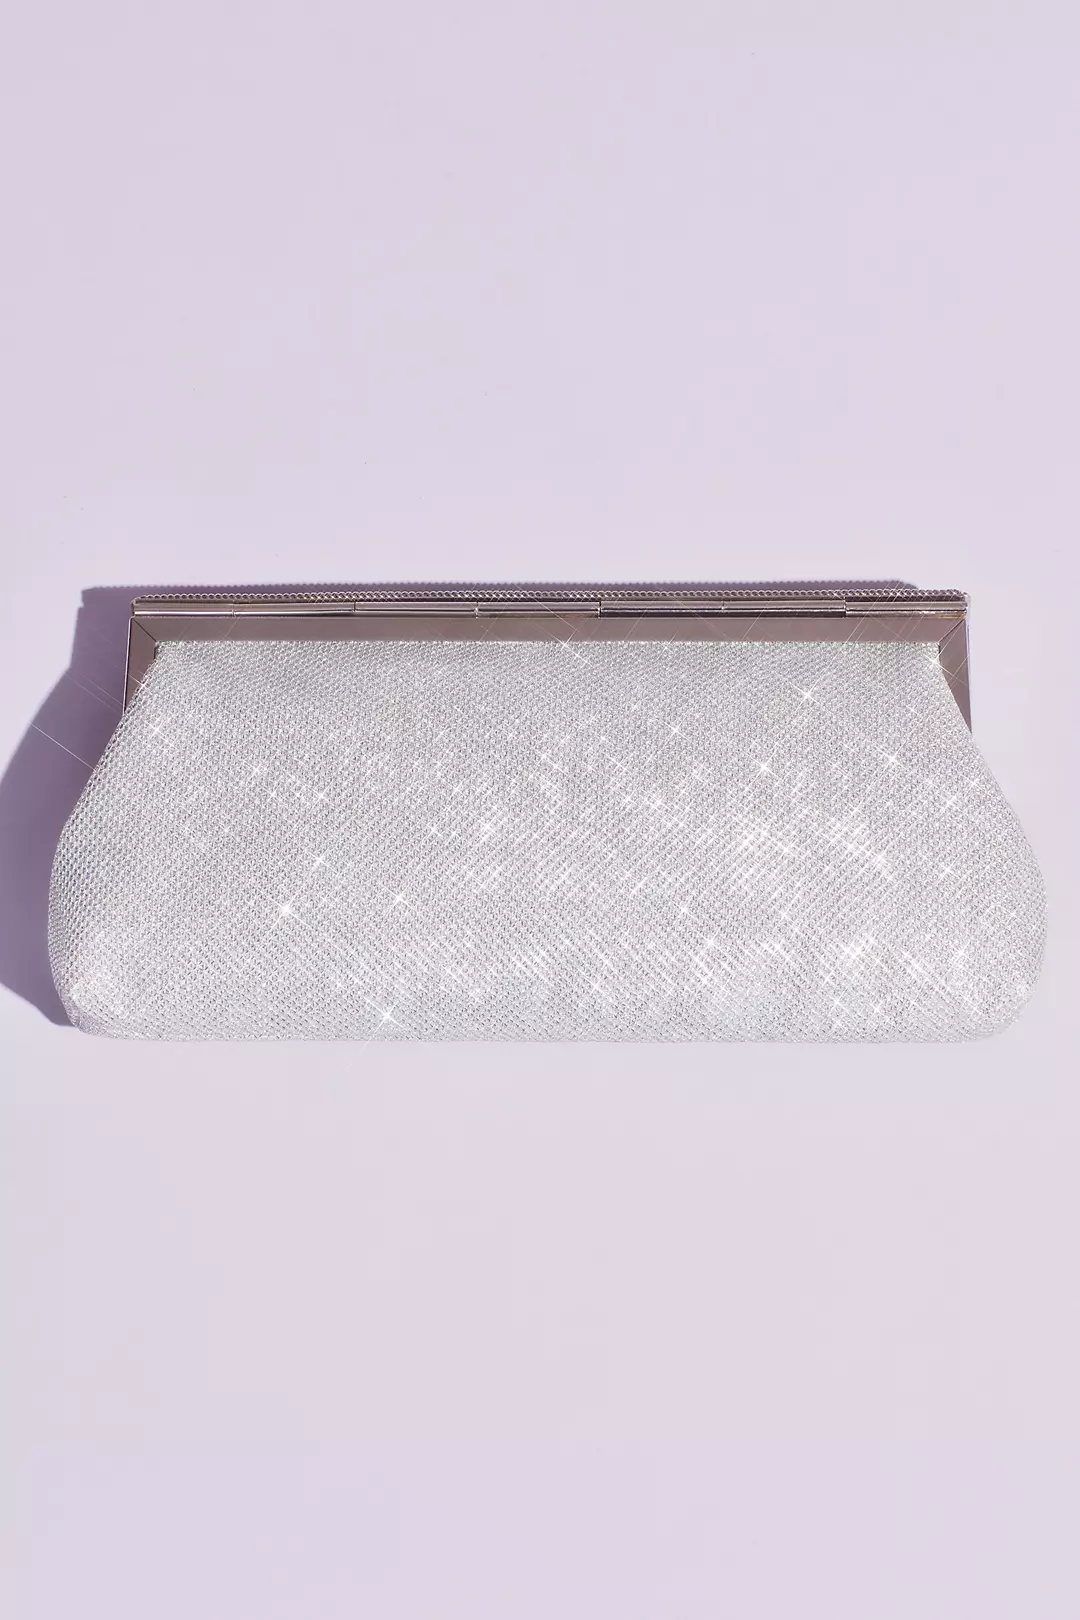 Crystal Top Clasp Glitter Baguette Clutch Image 2